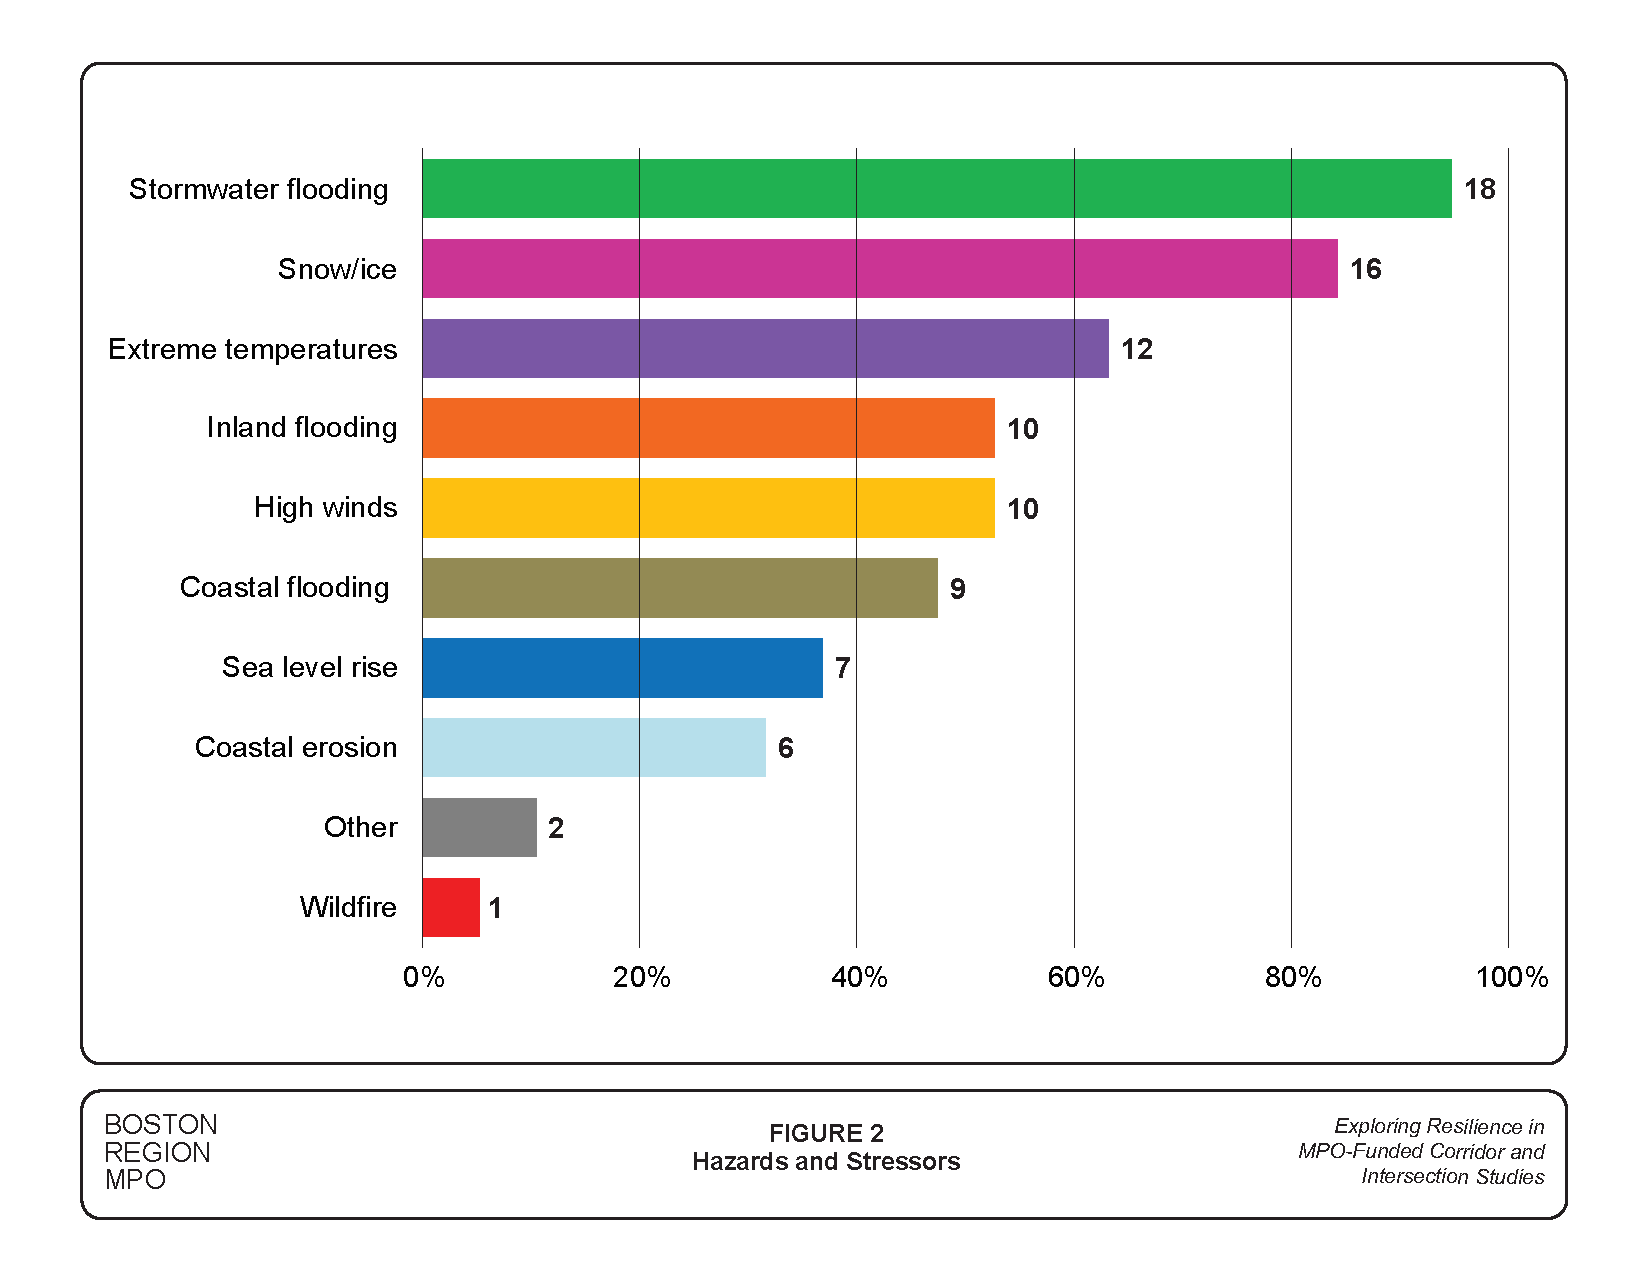 Figure 2 is a graph showing the survey results about hazards and stressors that affect transportation assets.